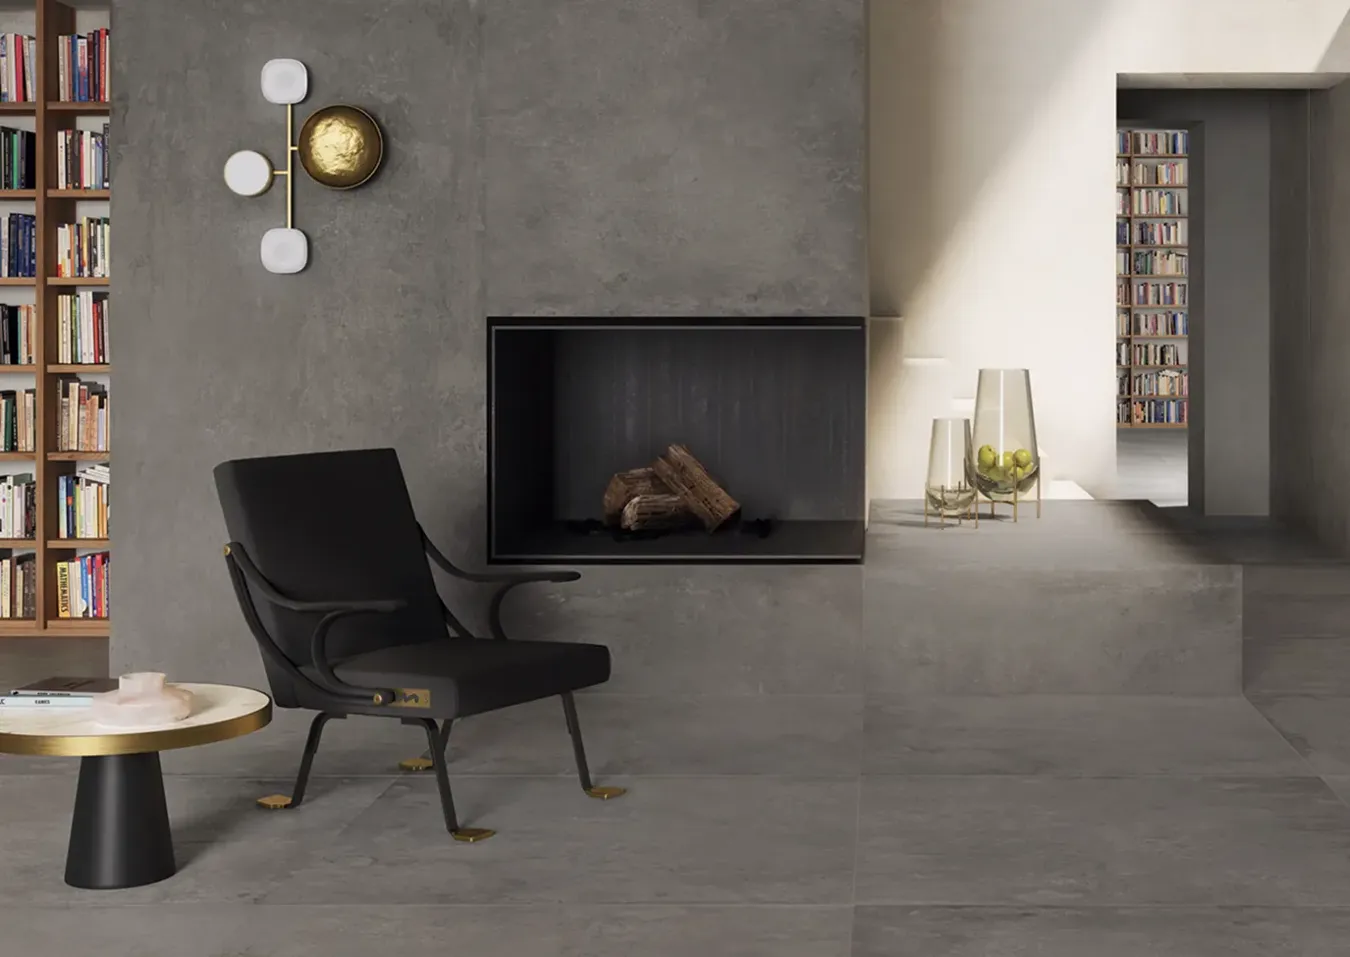 Stylish living room with a fireplace in gray stone-effect tiles, modern black chair and golden accents.